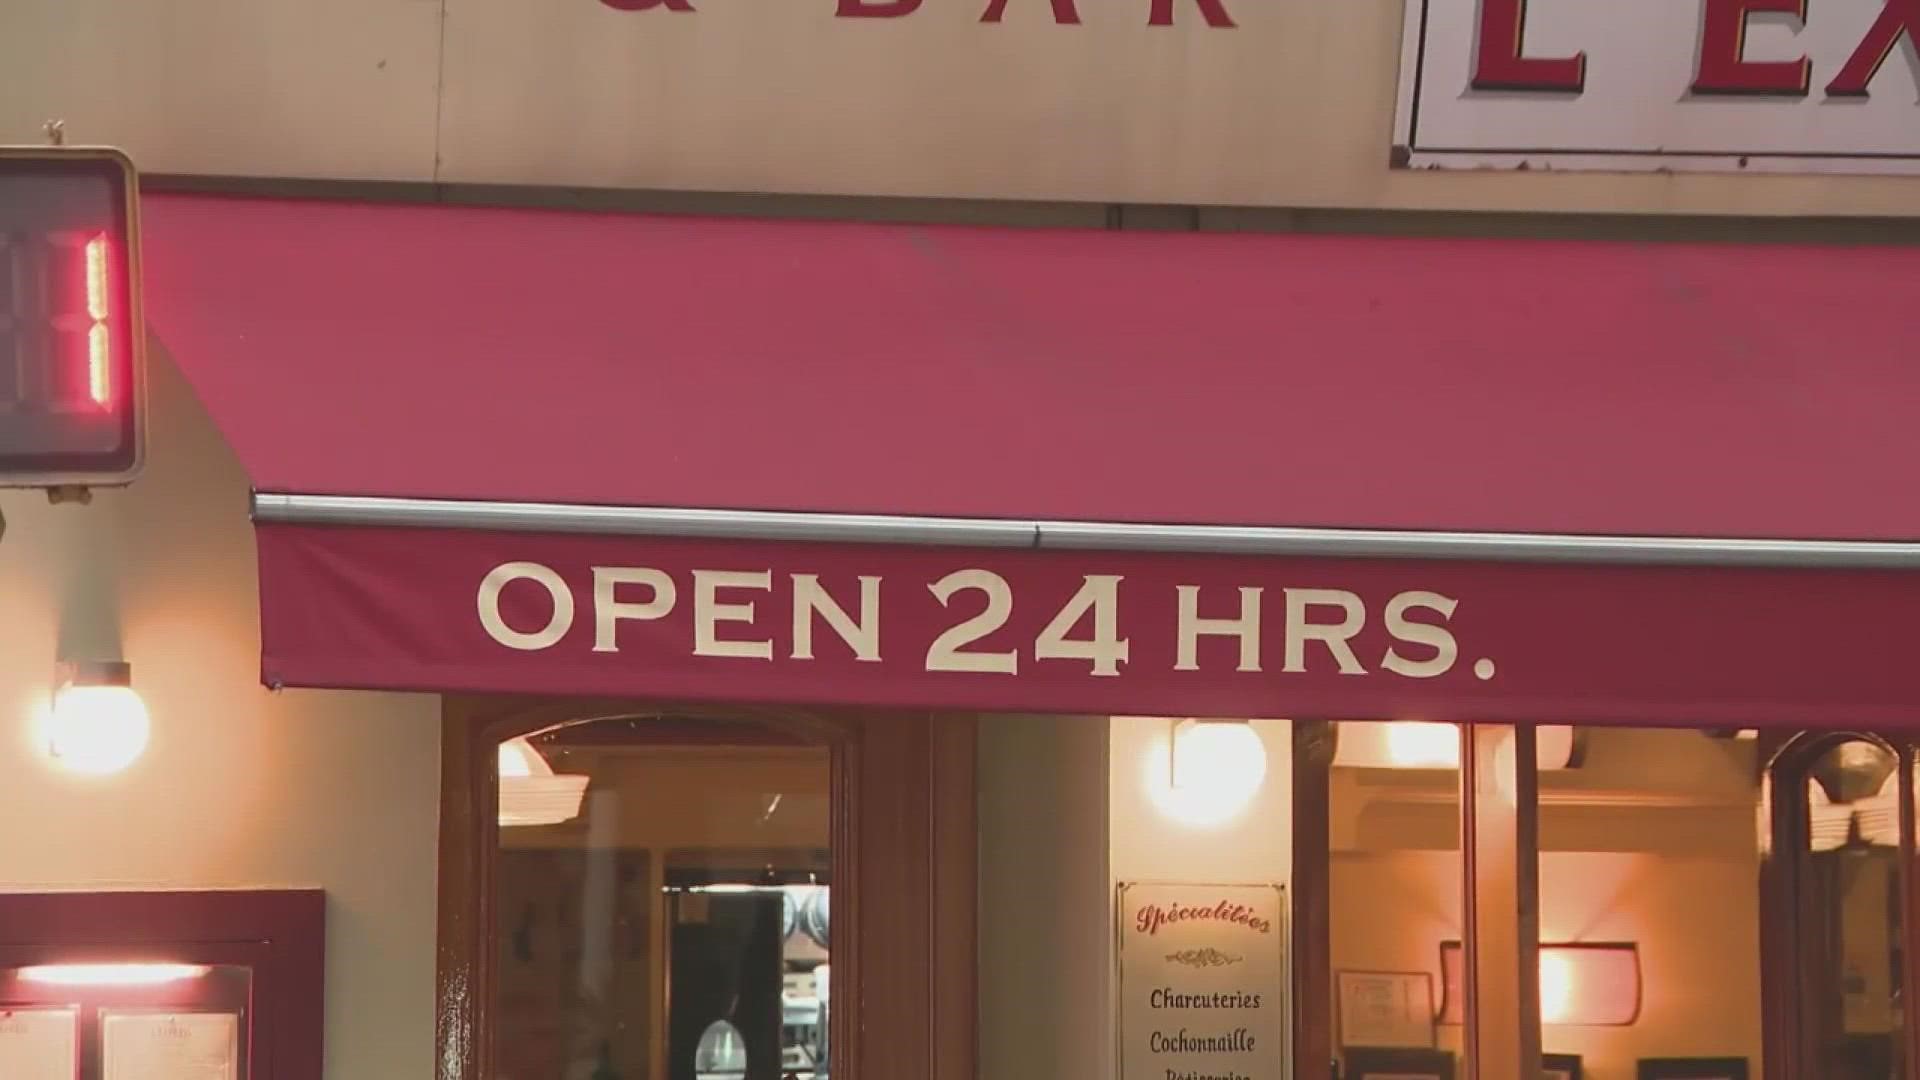 Many restaurants and businesses are closing instead of staying open all night.